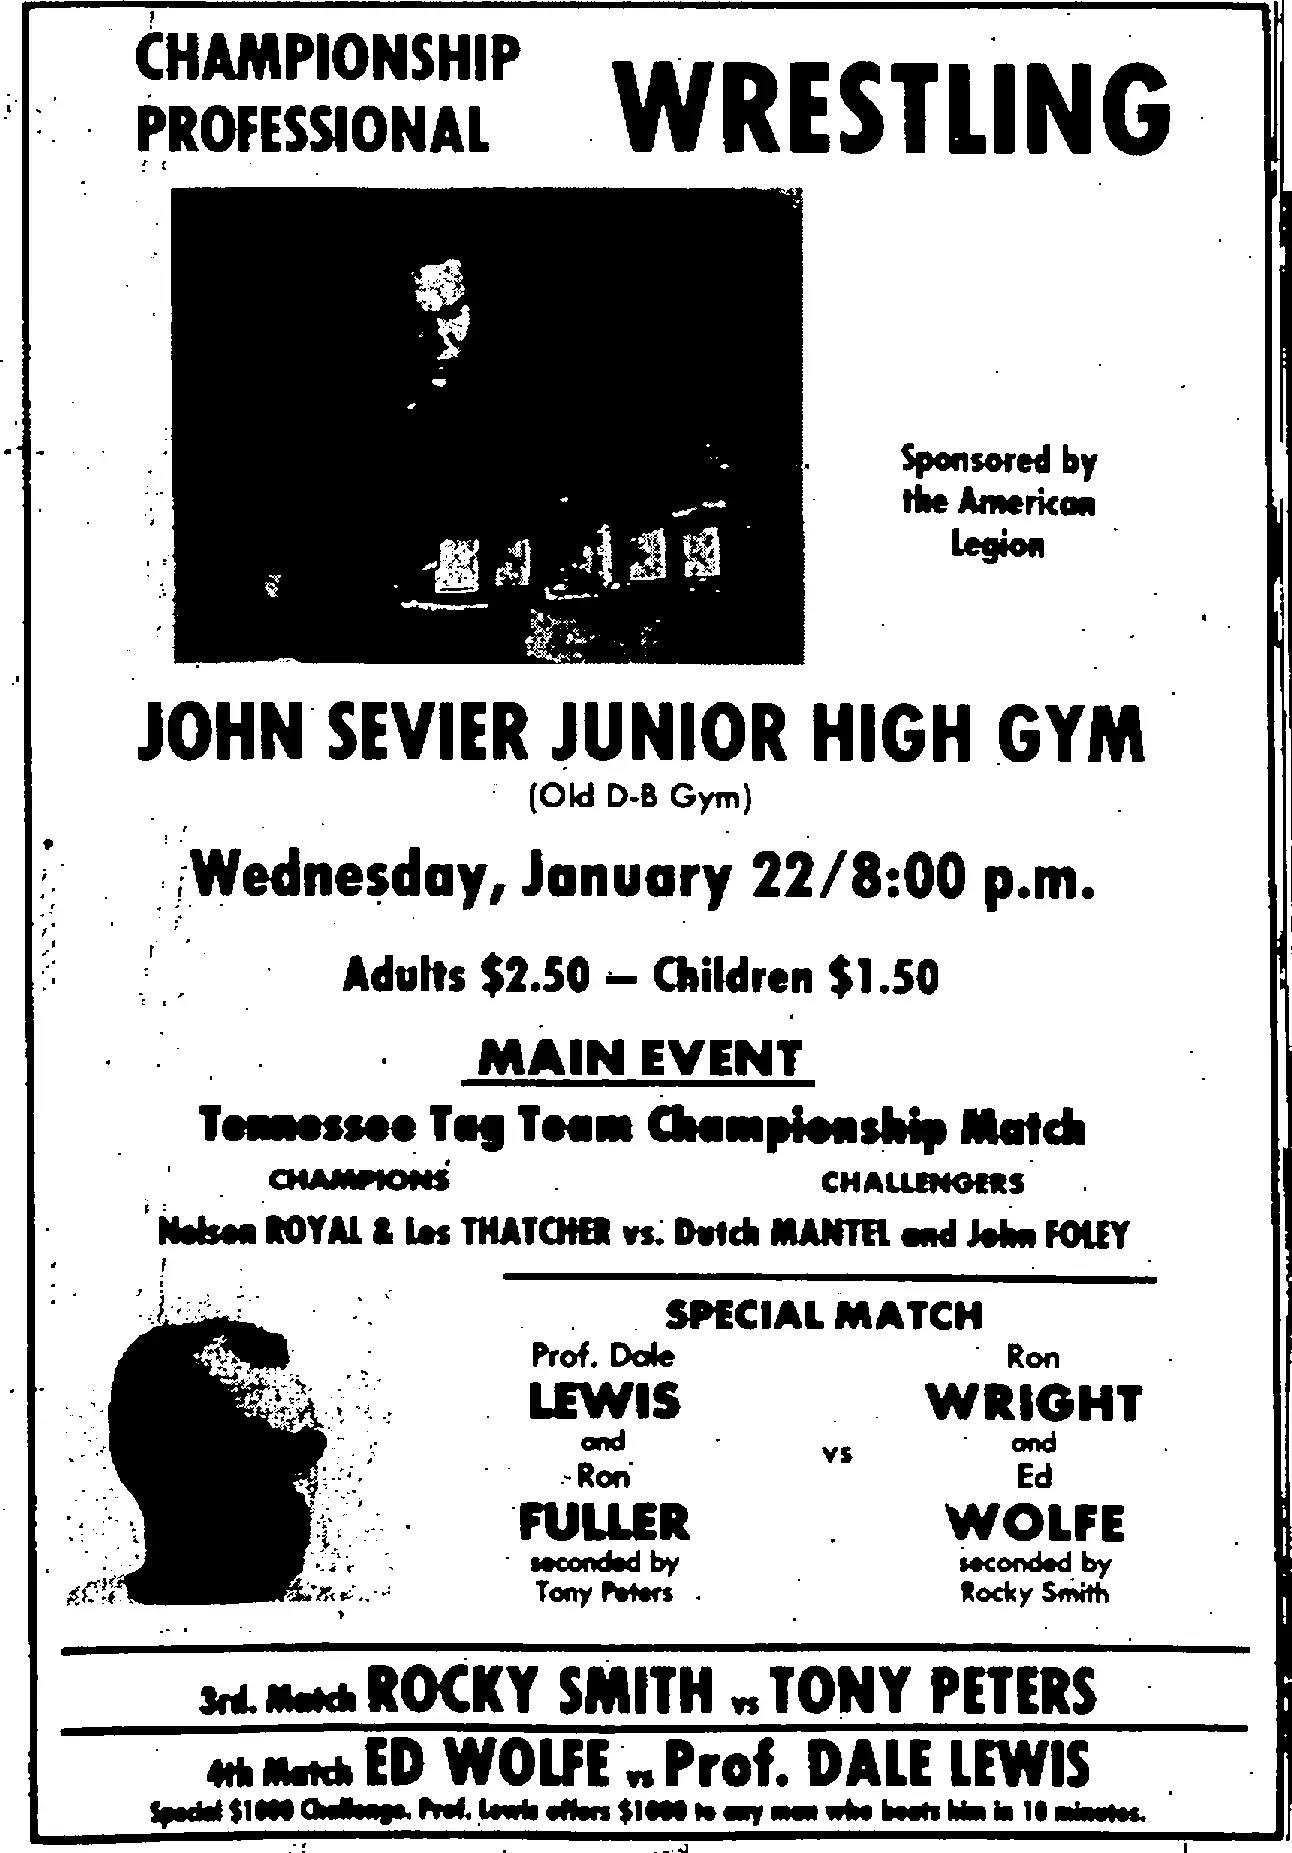 A Tony Peters clipping  for Kingsport, Tennessee, on January 22, 1975.